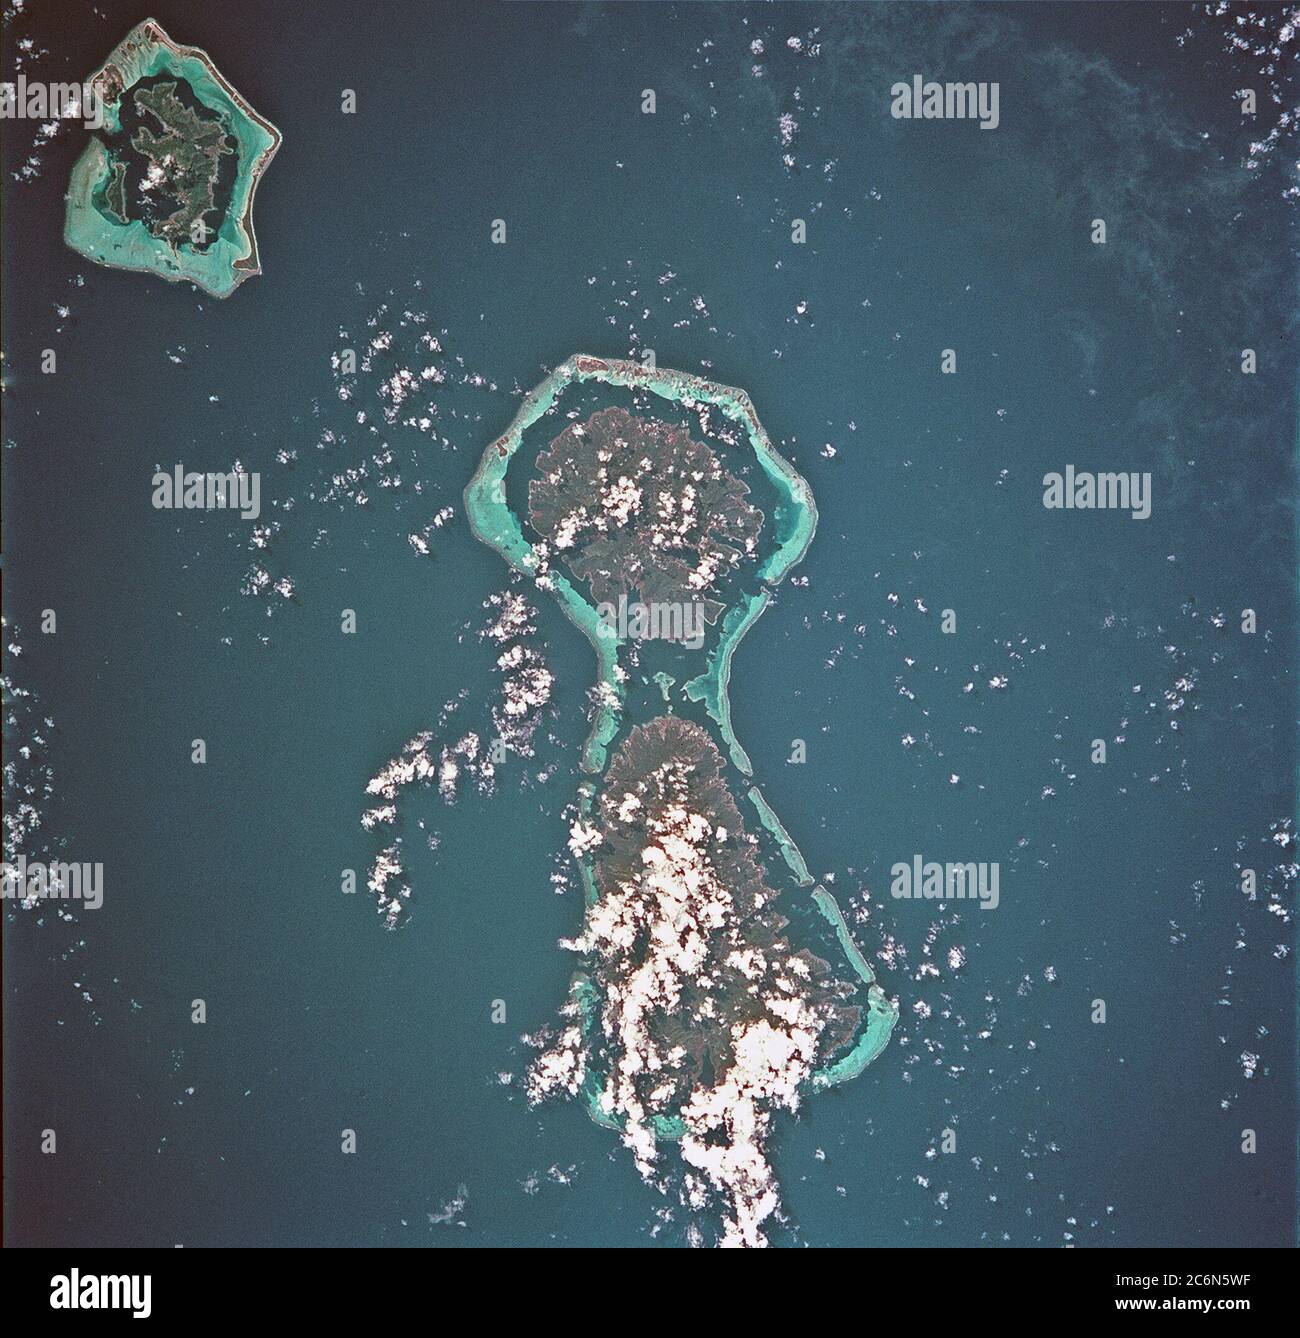 (23-27 July 1999) --- The STS-93 astronauts aboard the Space Shuttle Columbia took this picture featuring the Society Islands.  Delicate coral reefs ring the islands of Bora Bora (top), Tahaa (center) and Raiatea (bottom).  The Society Islands, which also include the island of Tahiti, are one of many archipelagoes that constitute French Polynesia in the central South Pacific. Stock Photo